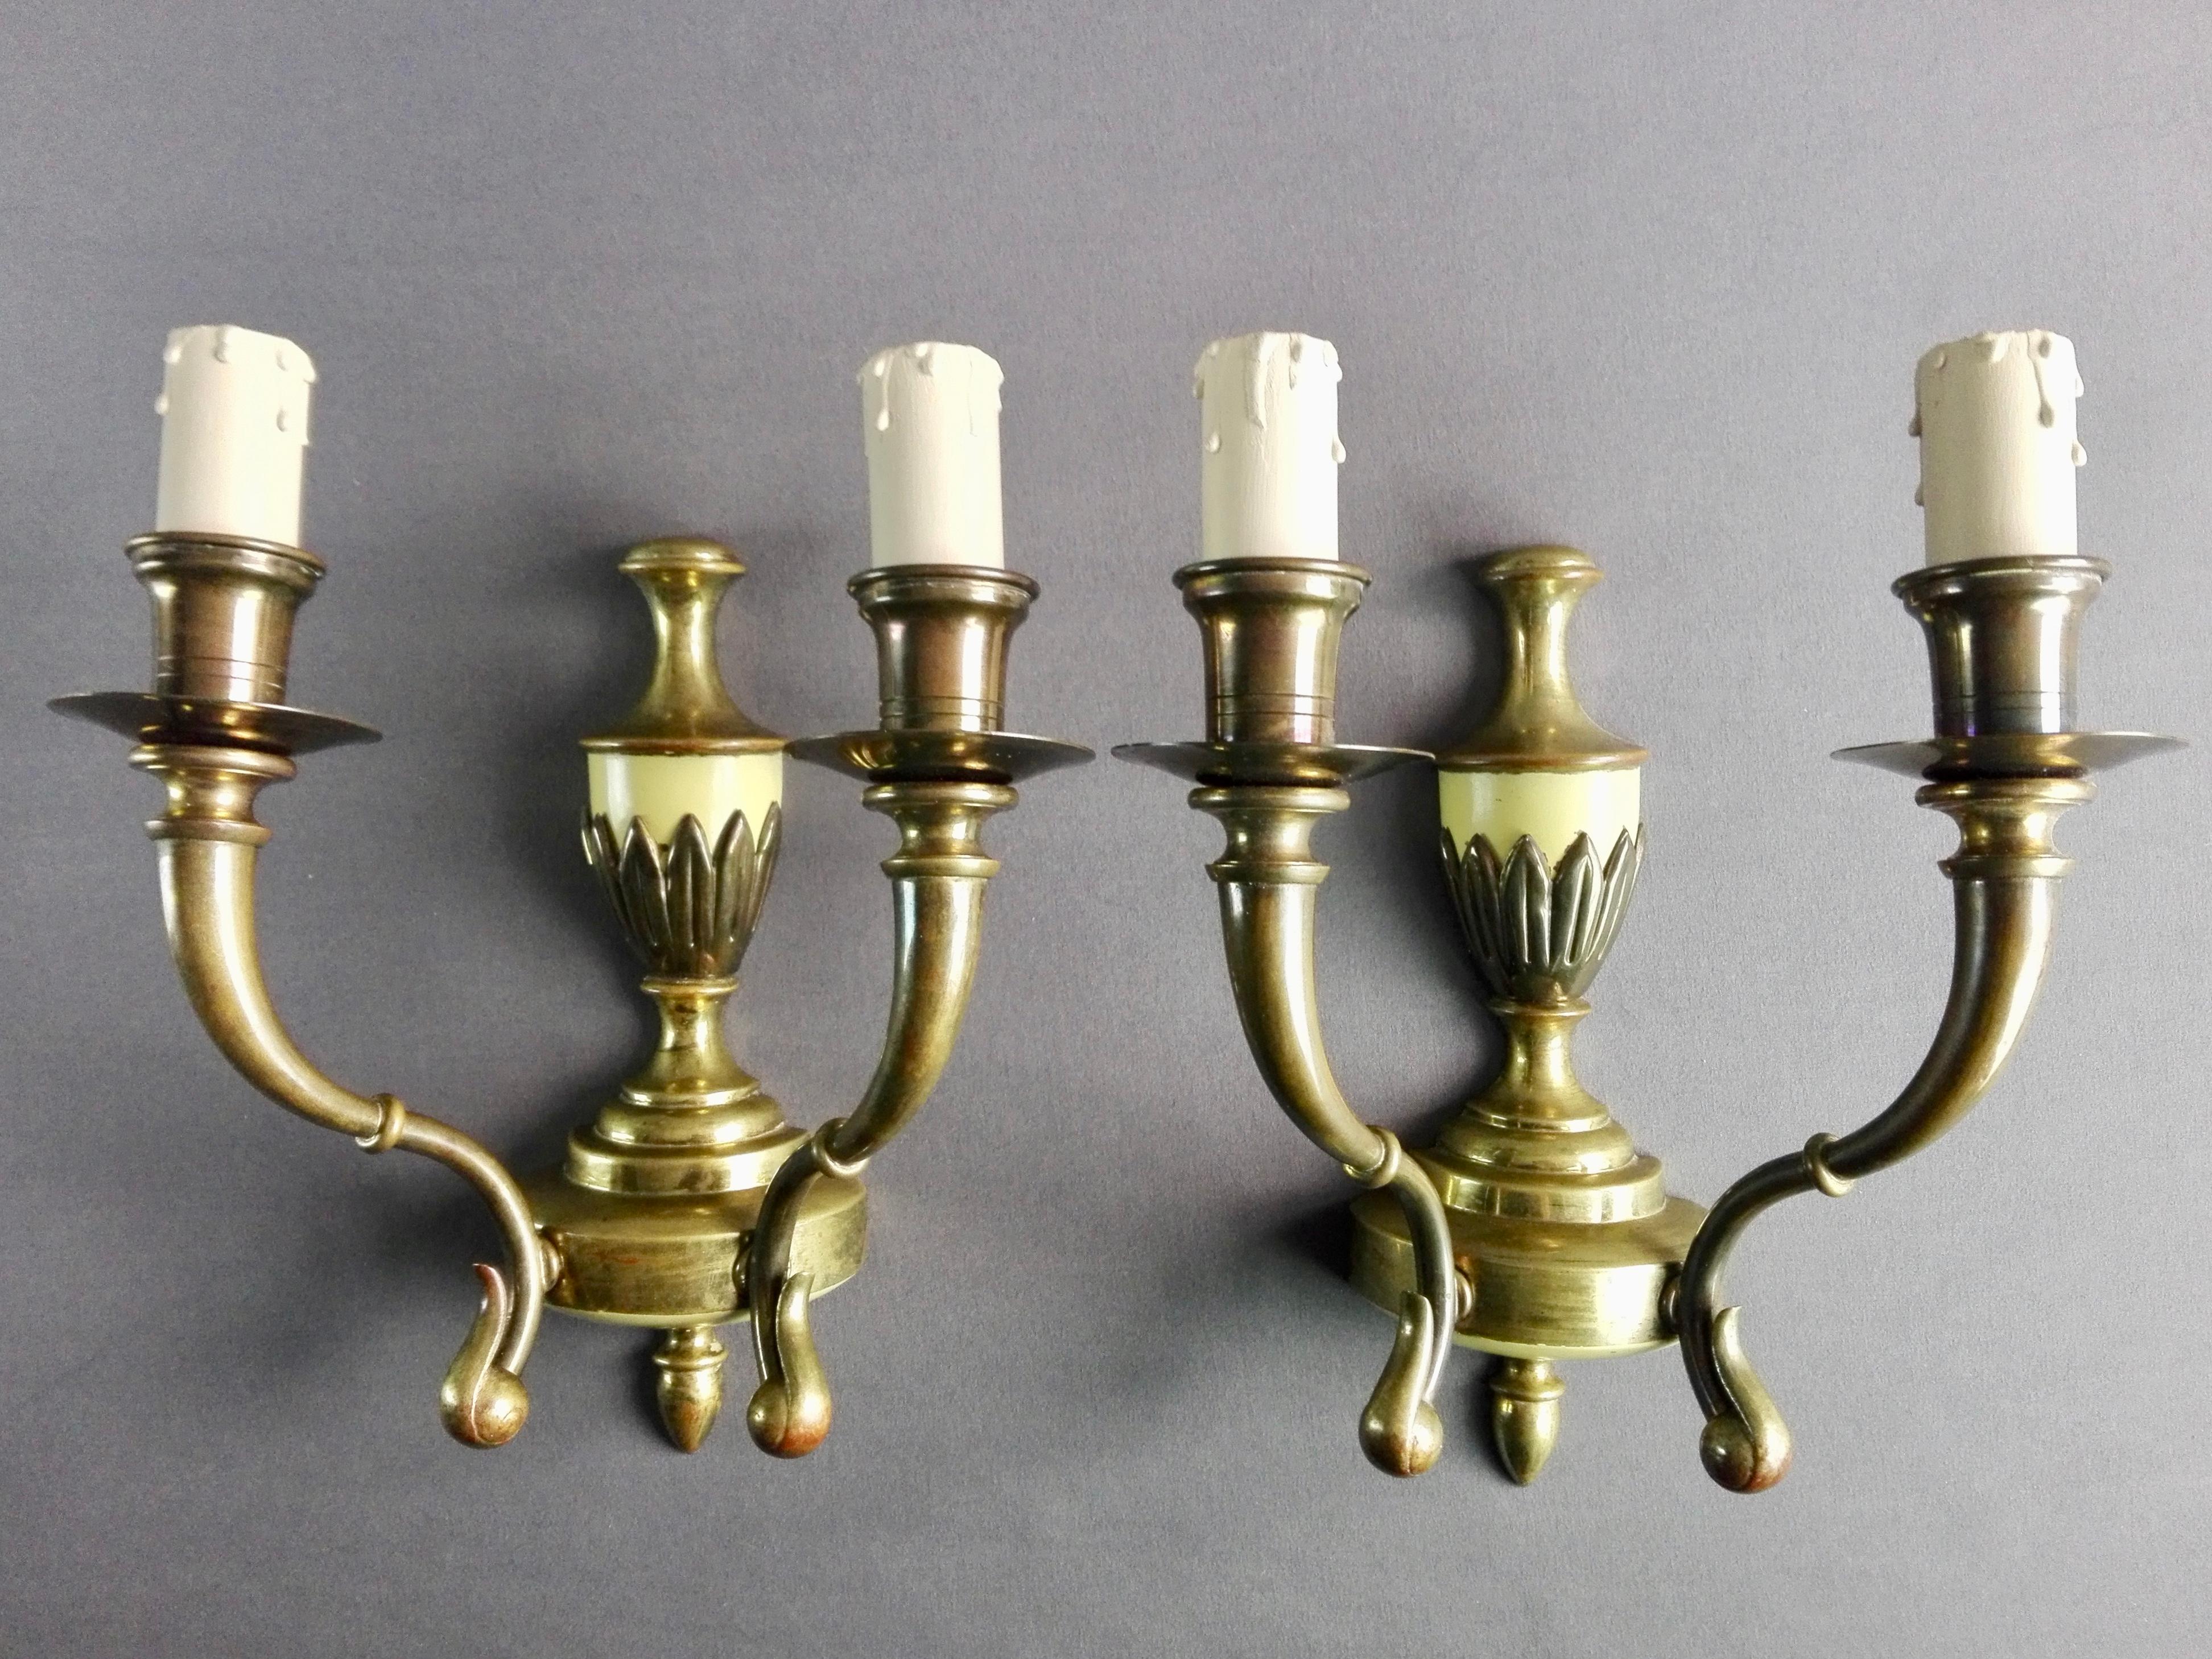 Pair of late 1940s - early 1950s Italian two-light sconces. The structures are in solid brass with ivory-yellow lacquered details and original wooden candle lampholders. 
Lamps have been completely disassembled to perform a thorough cleaning using